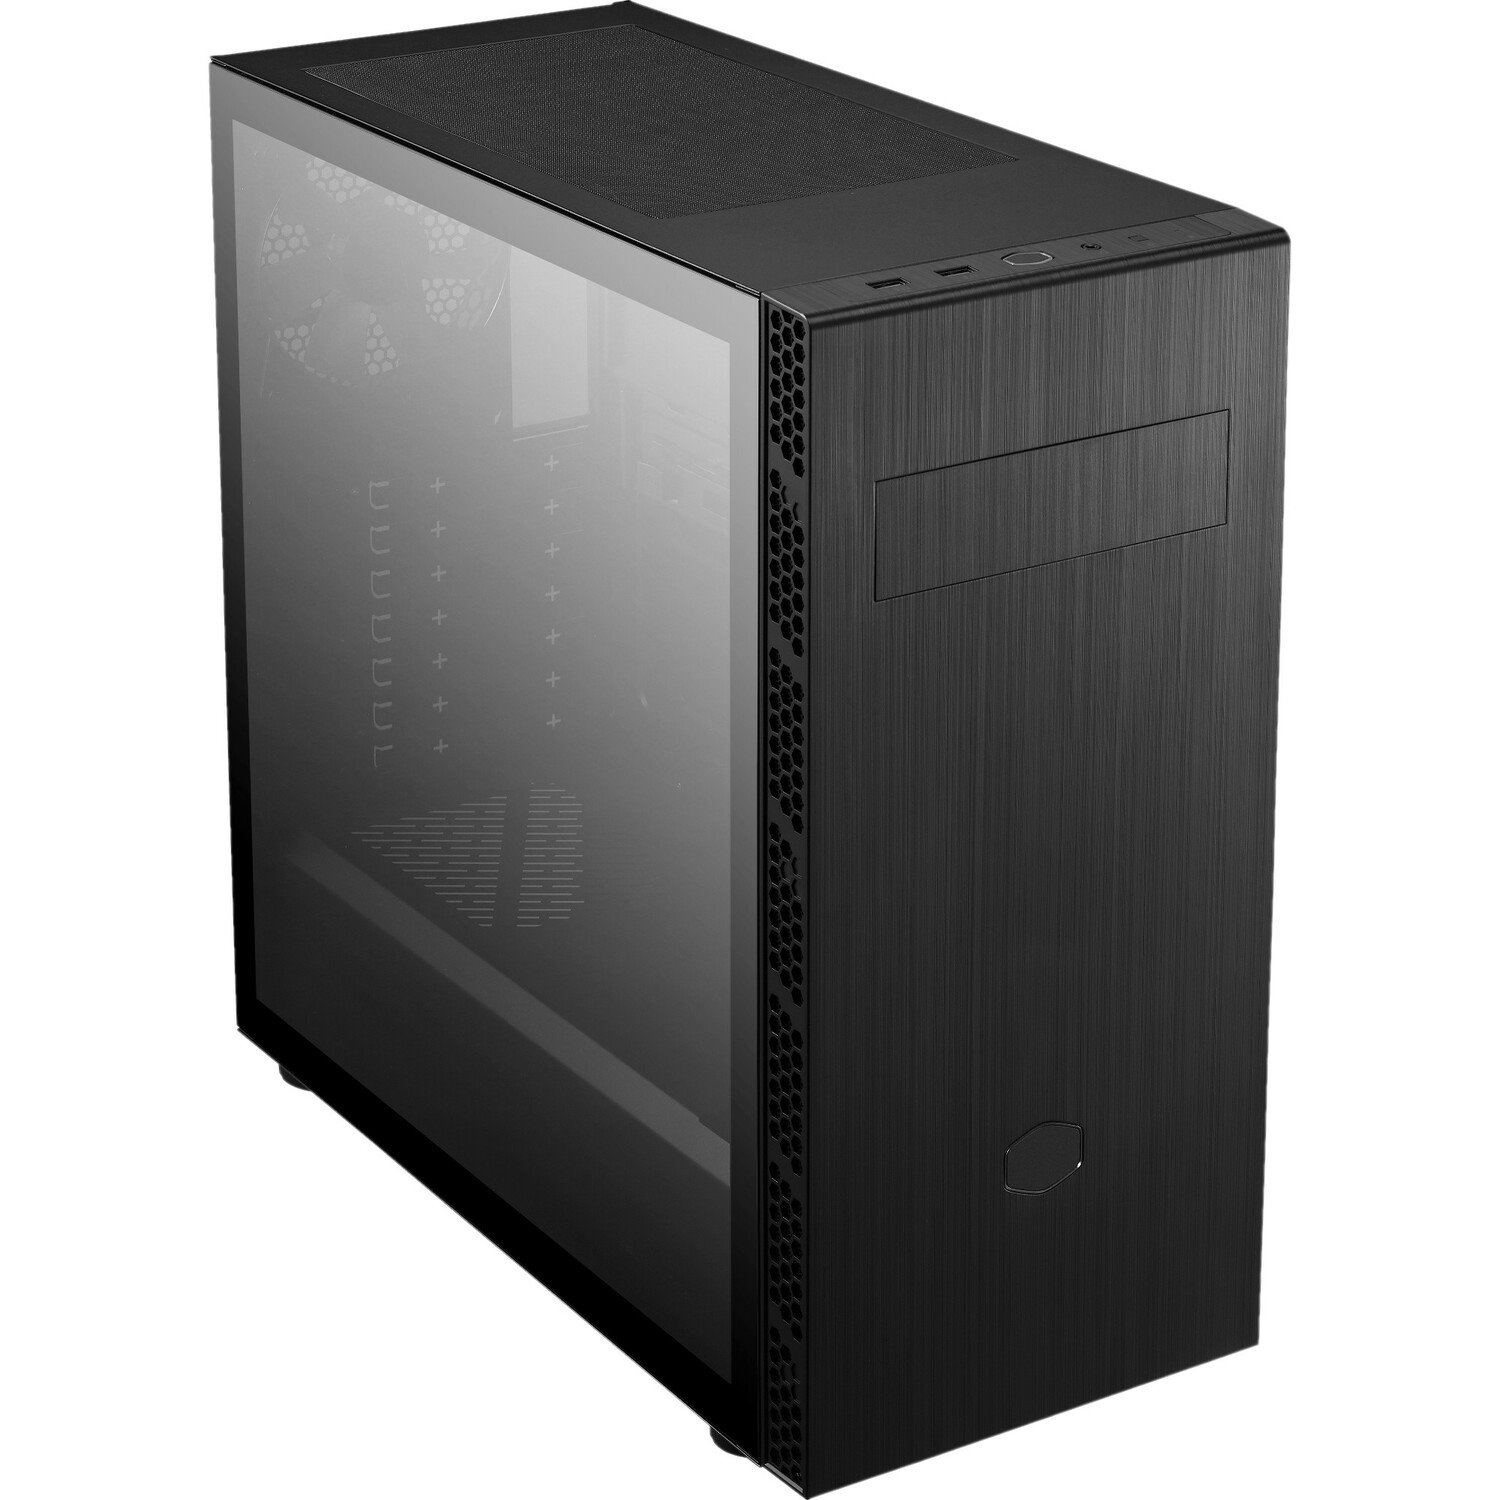 Cooler Master MasterBox MB600L2-KG5N-S00 Gaming Computer Case - ATX, Micro ATX, Mini ITX Motherboard Supported - Mid-tower - Steel, Plastic, Tempered Glass - Black